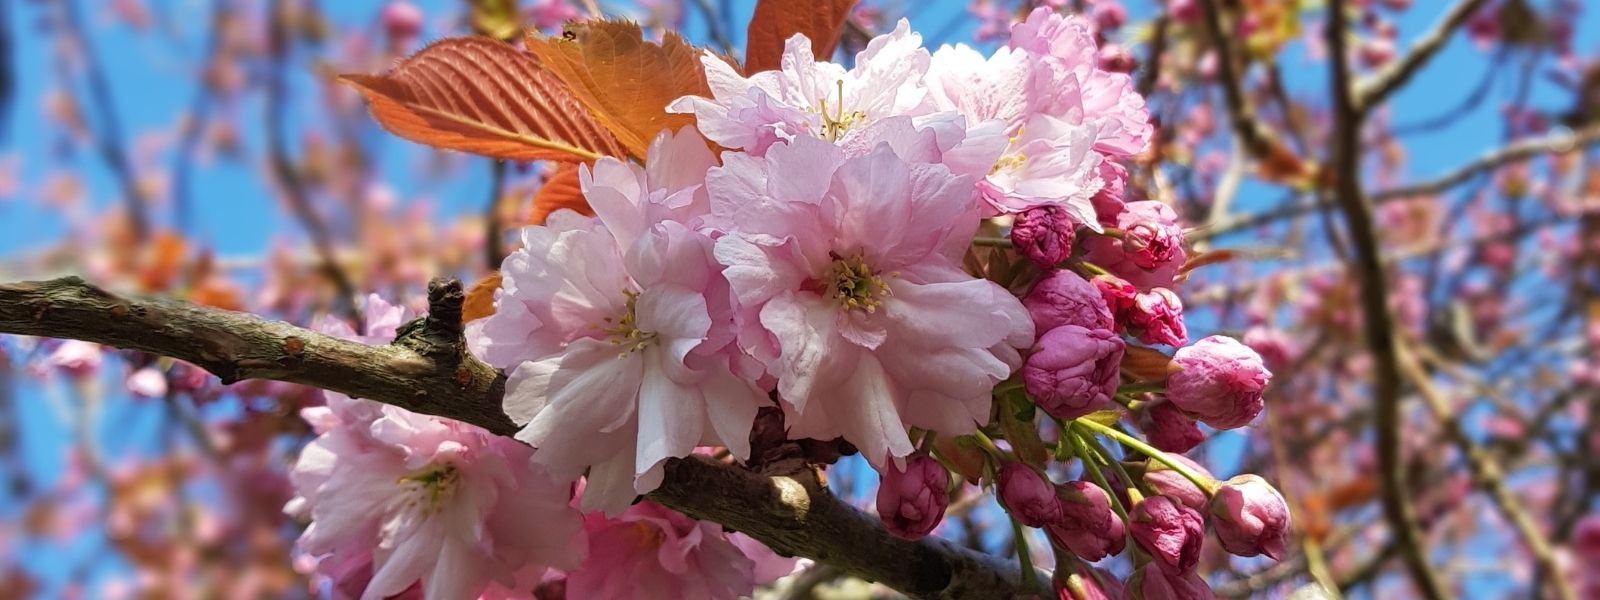 A close-up shot of pink cherry blossom